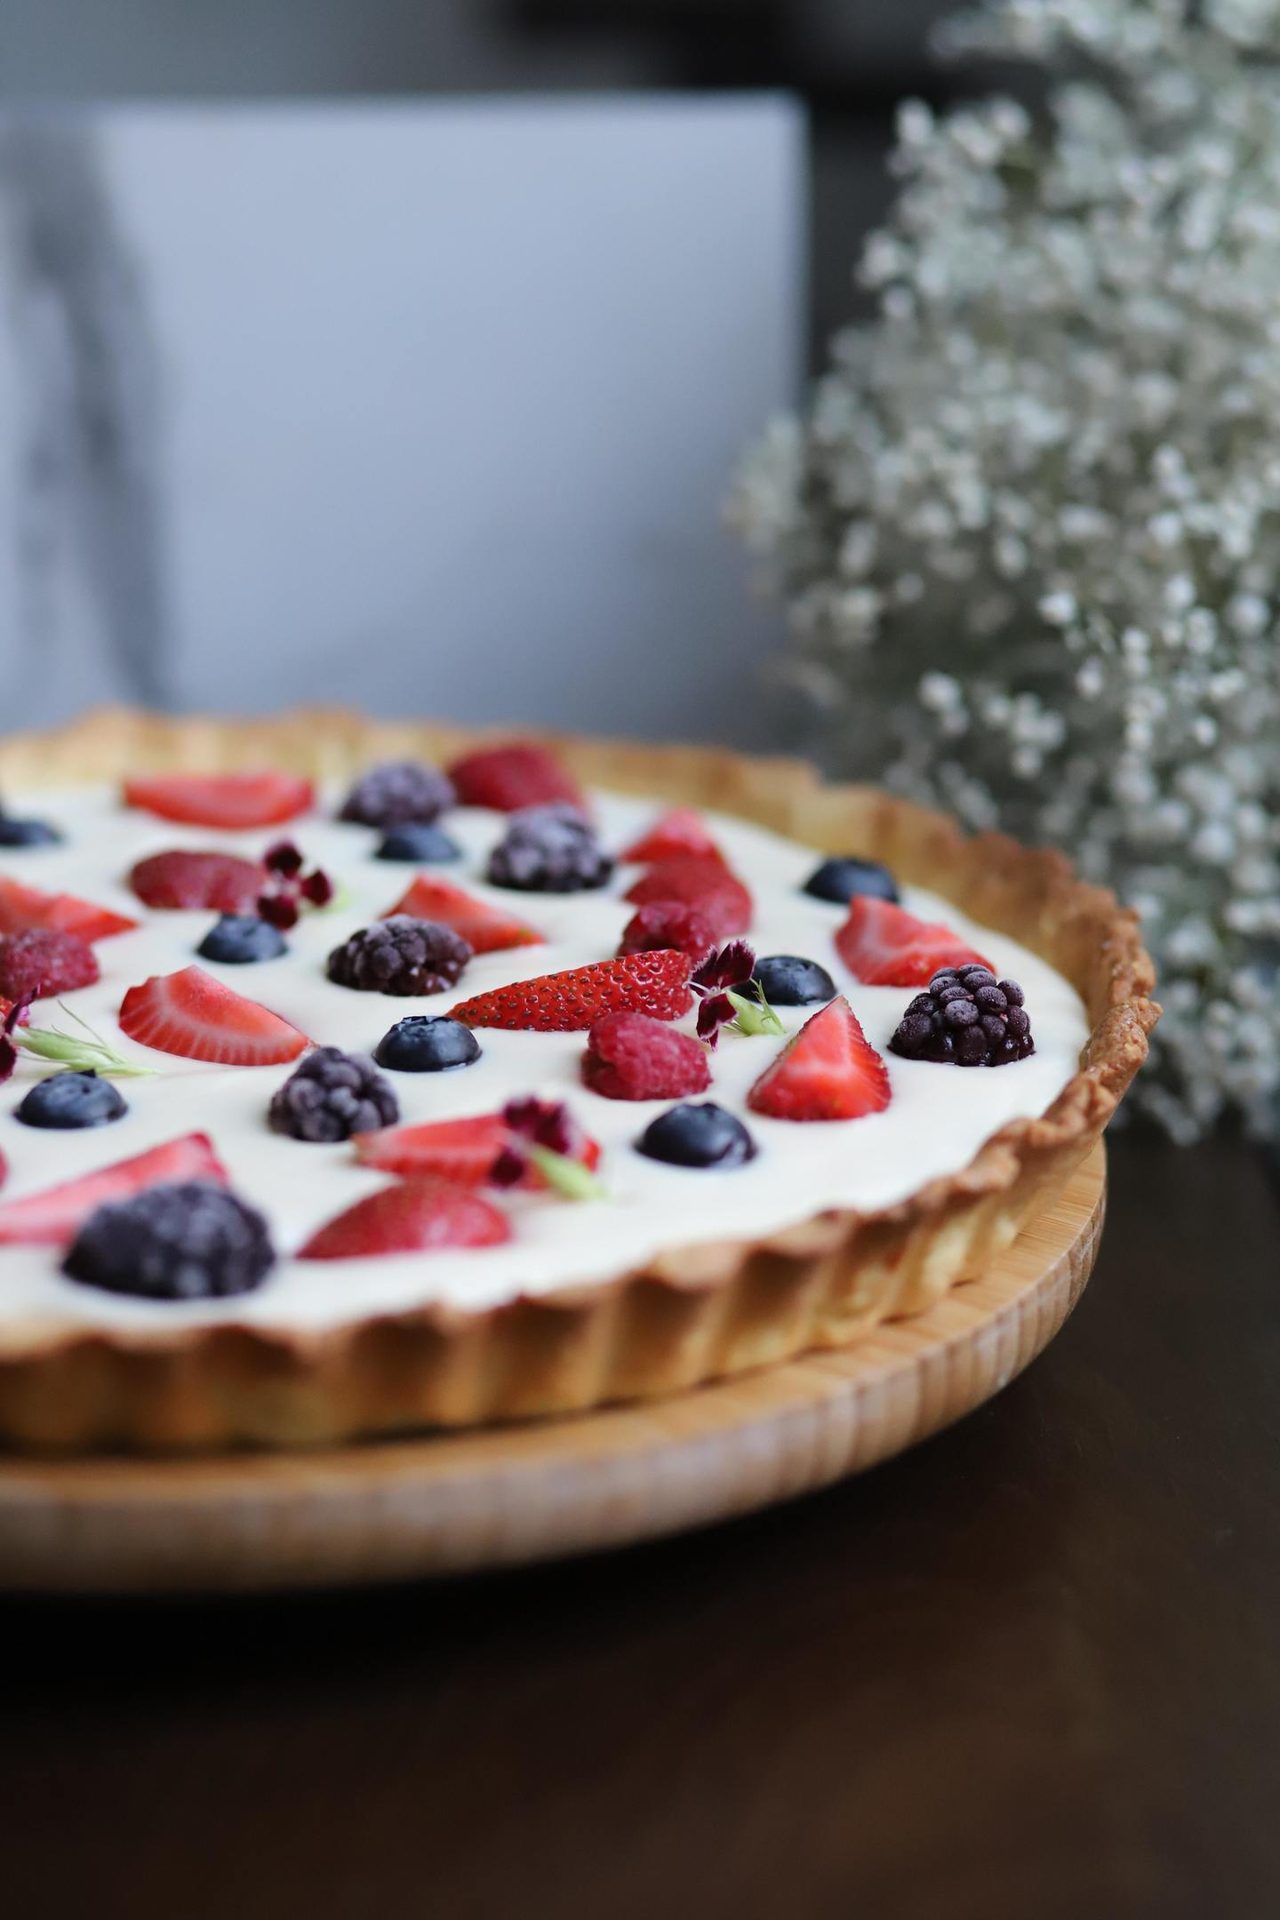 Baked goods, Food, Plant, Ingredient, Fruit, Recipe, Strawberry, Cuisine, Berry, Dish